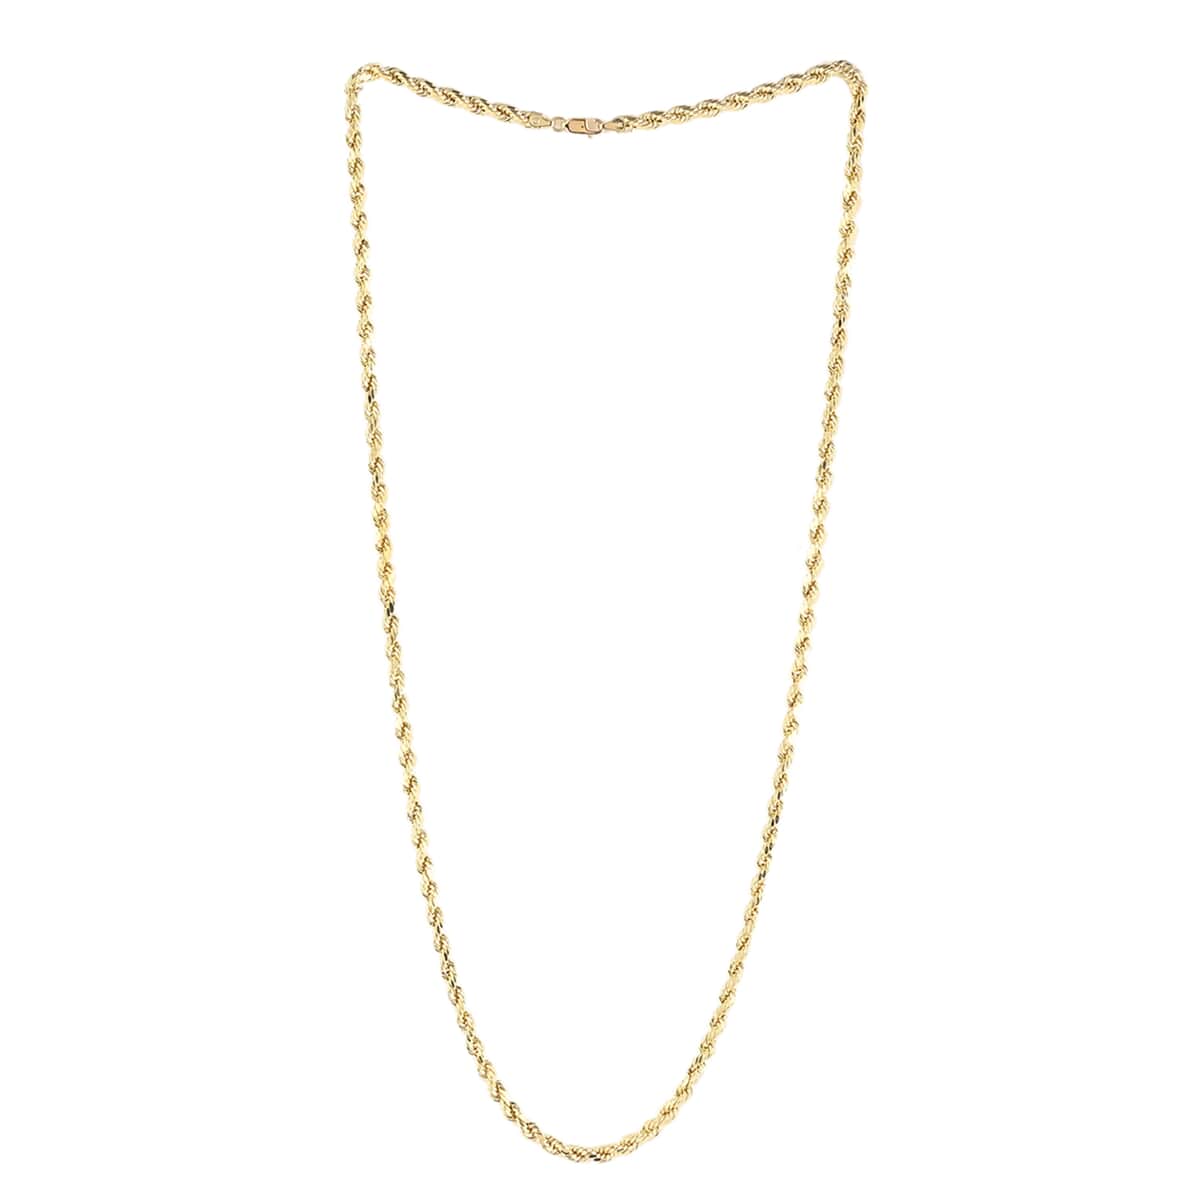 CALIFORNIA CLOSEOUT DEAL 10K Yellow Gold 4mm Diamond Cut Rope Necklace 18 Inches 7.25 Grams (Shipped in 3-4 Business Days) image number 1